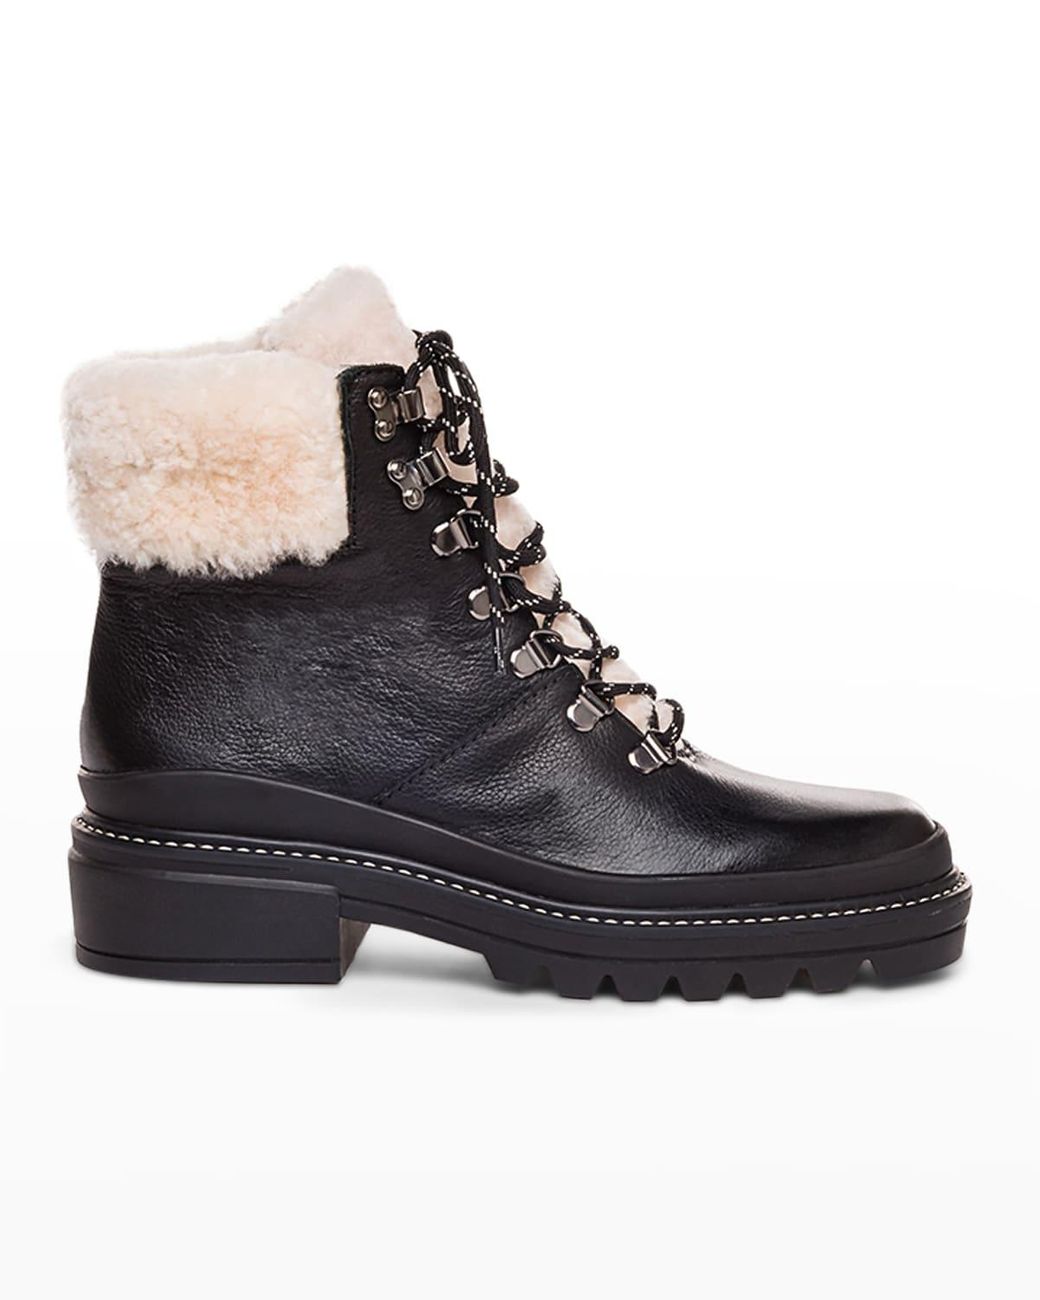 Bernardo Dash Leather Shearling Lace-up Boots in Black | Lyst